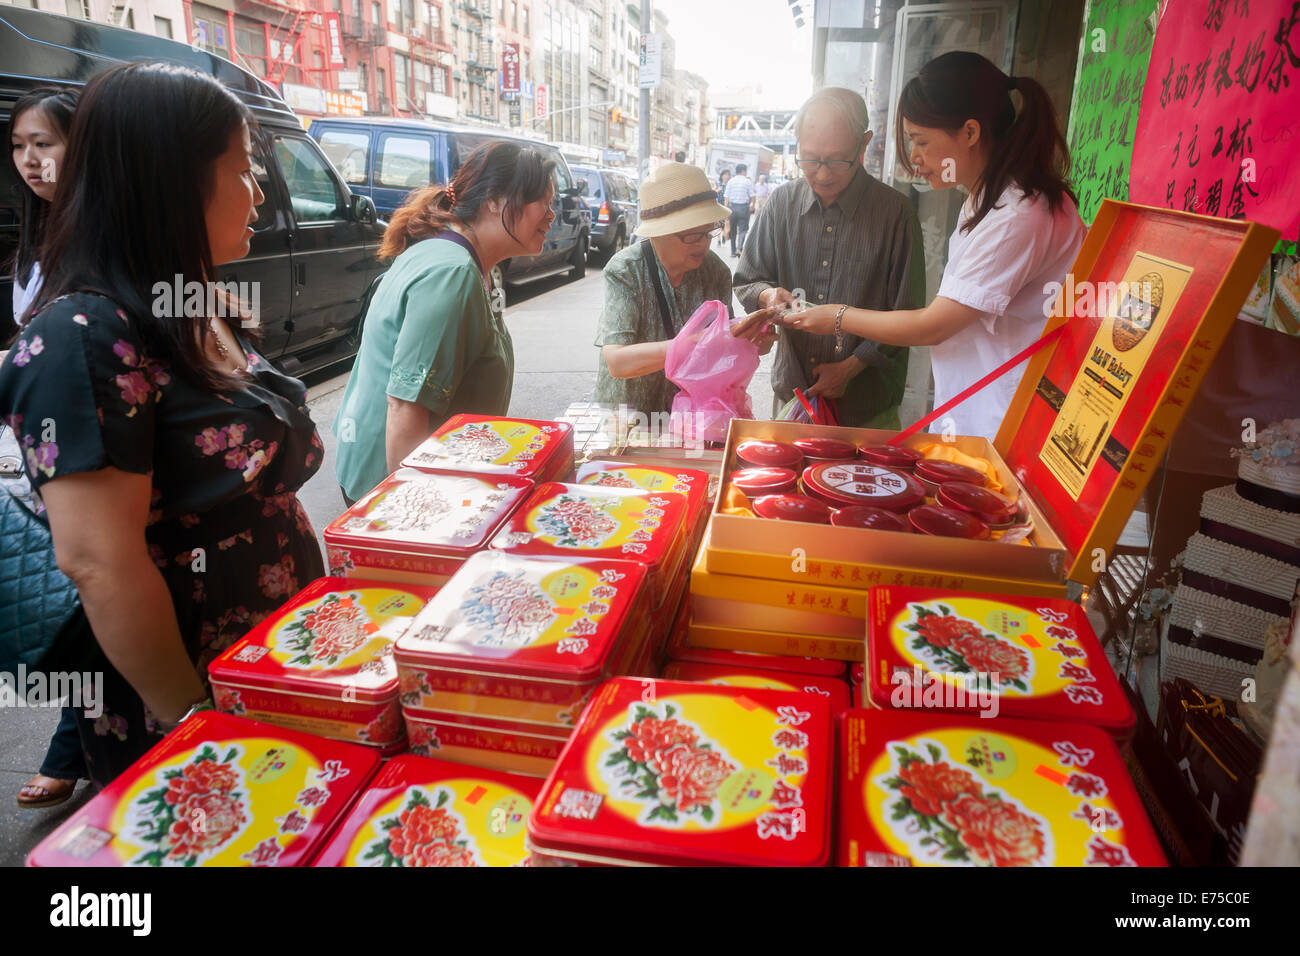 New York, USA. 7th September, 2014. Shoppers in Chinatown in New York buy boxes of mooncakes on Sunday, September 7, 2014 for the Mid-Autumn Festival which occurs on September 8. The delicious traditional baked product is eaten during the Mid-Autumn festival and are popular as gifts. The perfectly round pastries can be sweet or savory, filled with lotus seed or salted duck egg. The cakes represent the full moon on the eighth month, the fifteenth day in the Chinese (lunar) calendar. Credit:  Richard Levine/Alamy Live News Stock Photo